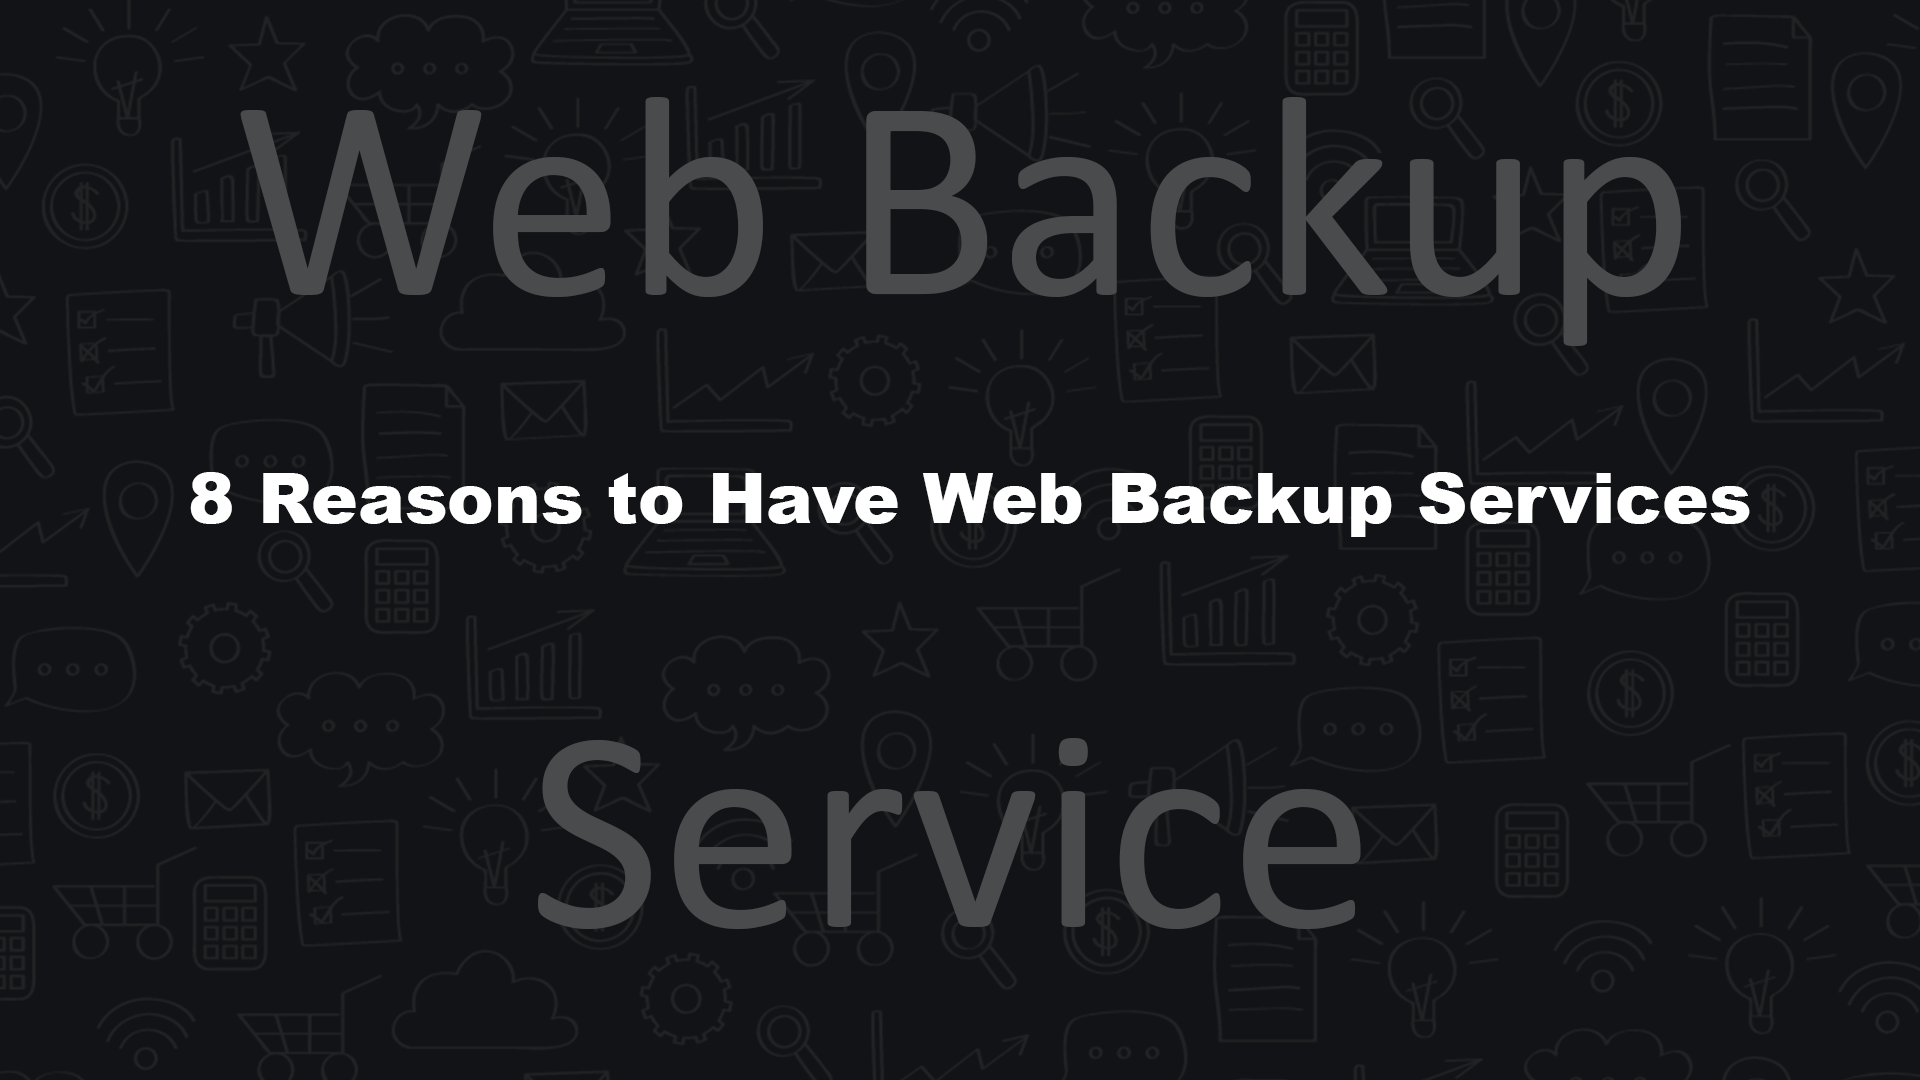 8 reasons to have Web backup services